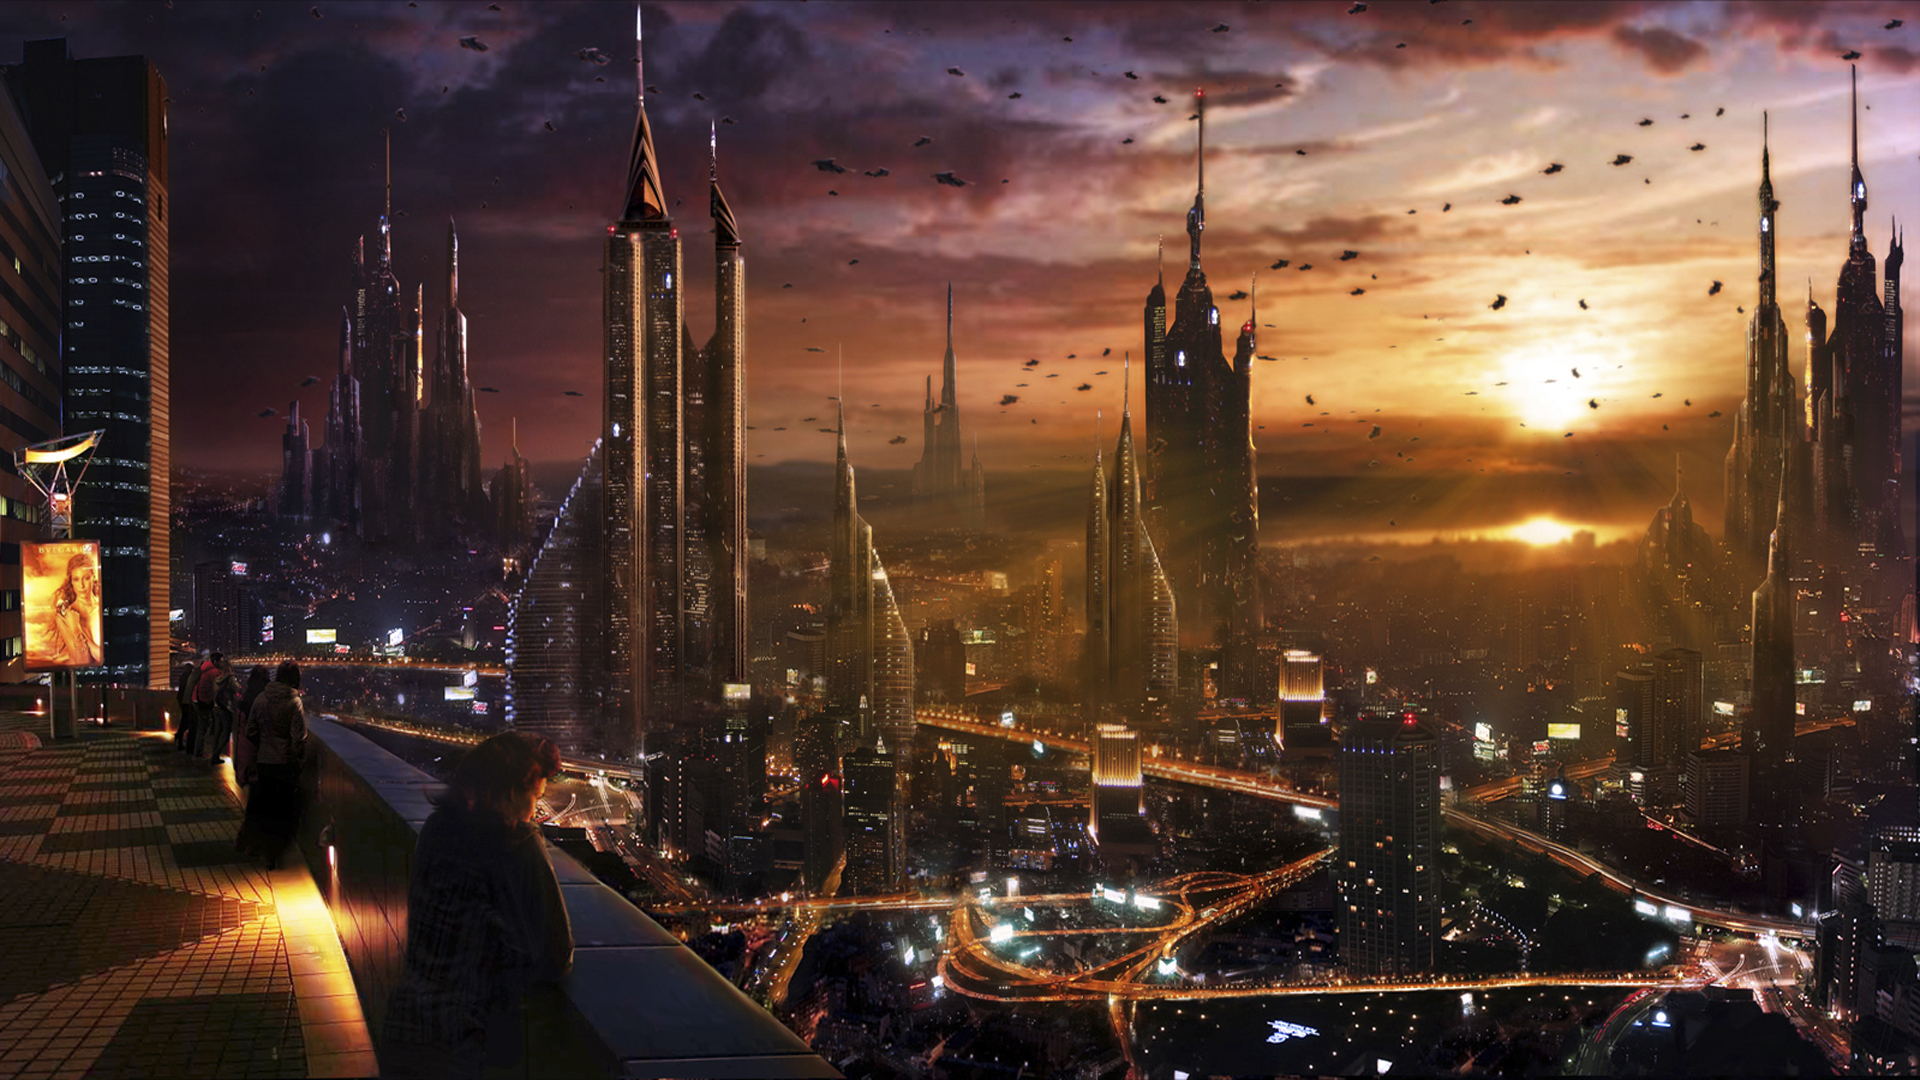 vladimir, Manyuhina, Cg, Digital, Manipulation, Sci, Fi, Science, Fiction, Futuristic, Cities, Architecture, Buildings, Skyscrapers, Sky, Clouds, Sunset, Vehicles, Alien, Detail, Cars, Spaceship, Spacecraft Wallpaper